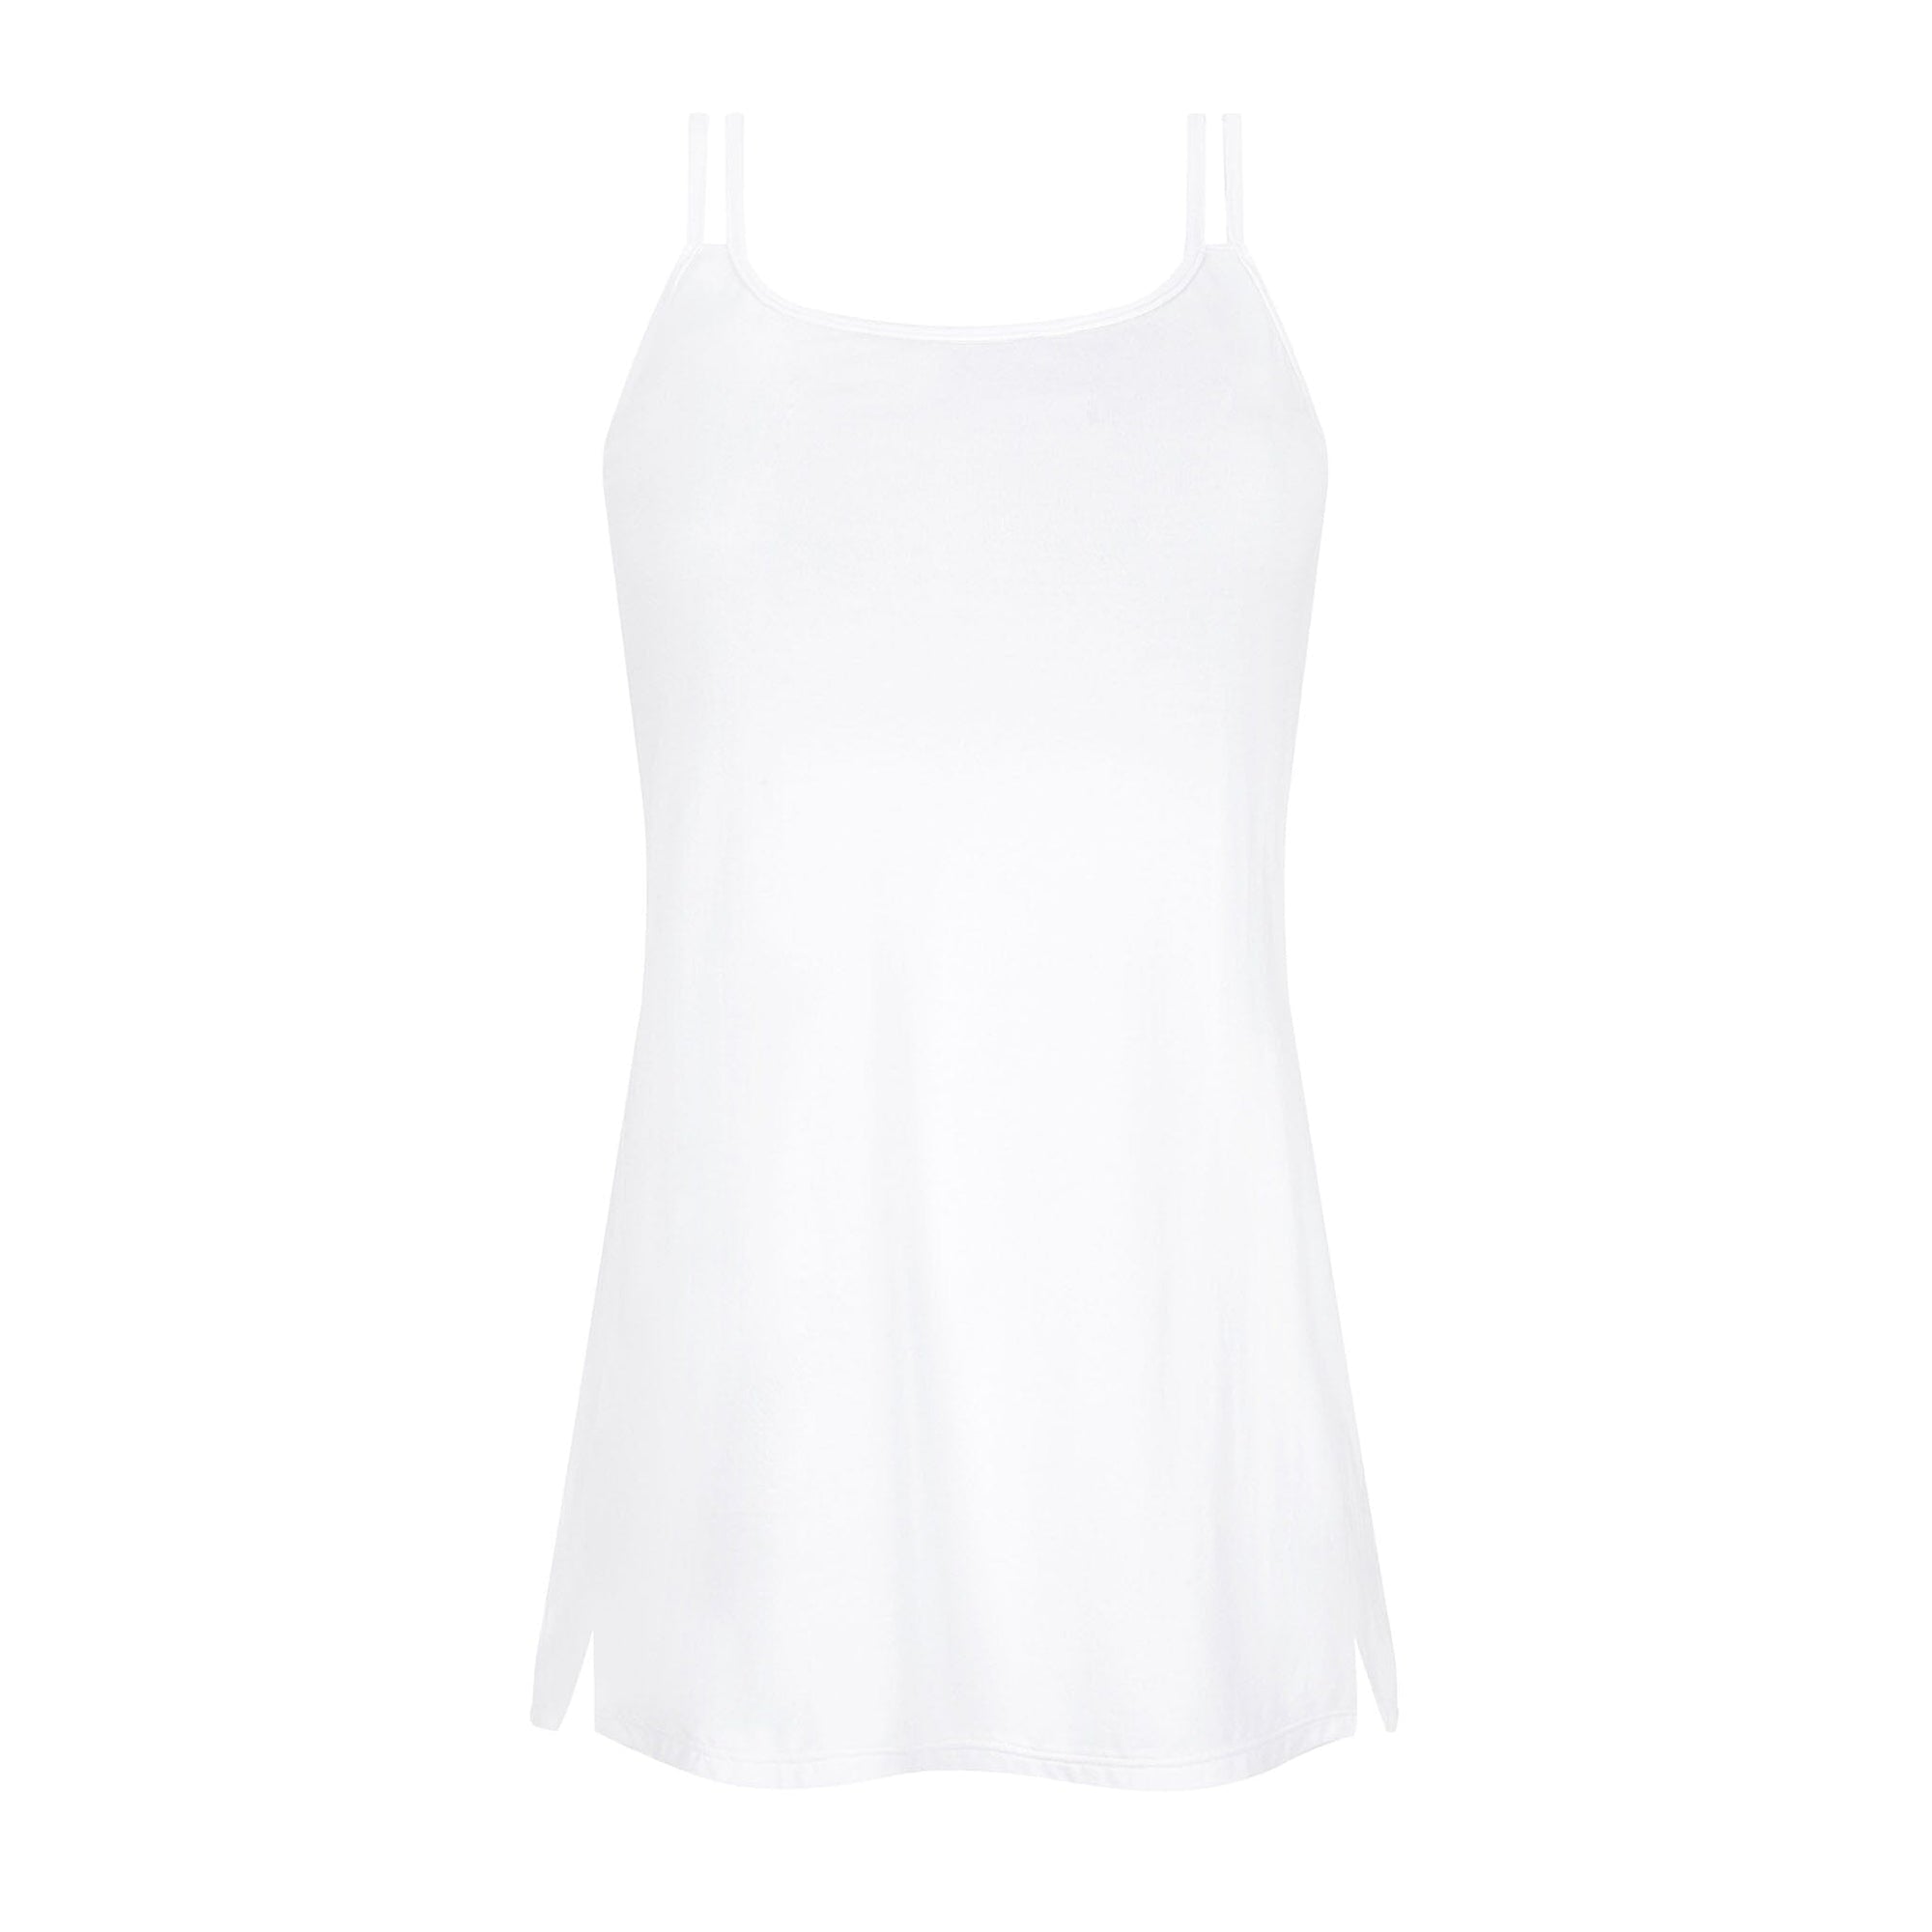 Amoena® Valletta Tall Camisole-Shown in White-Back View